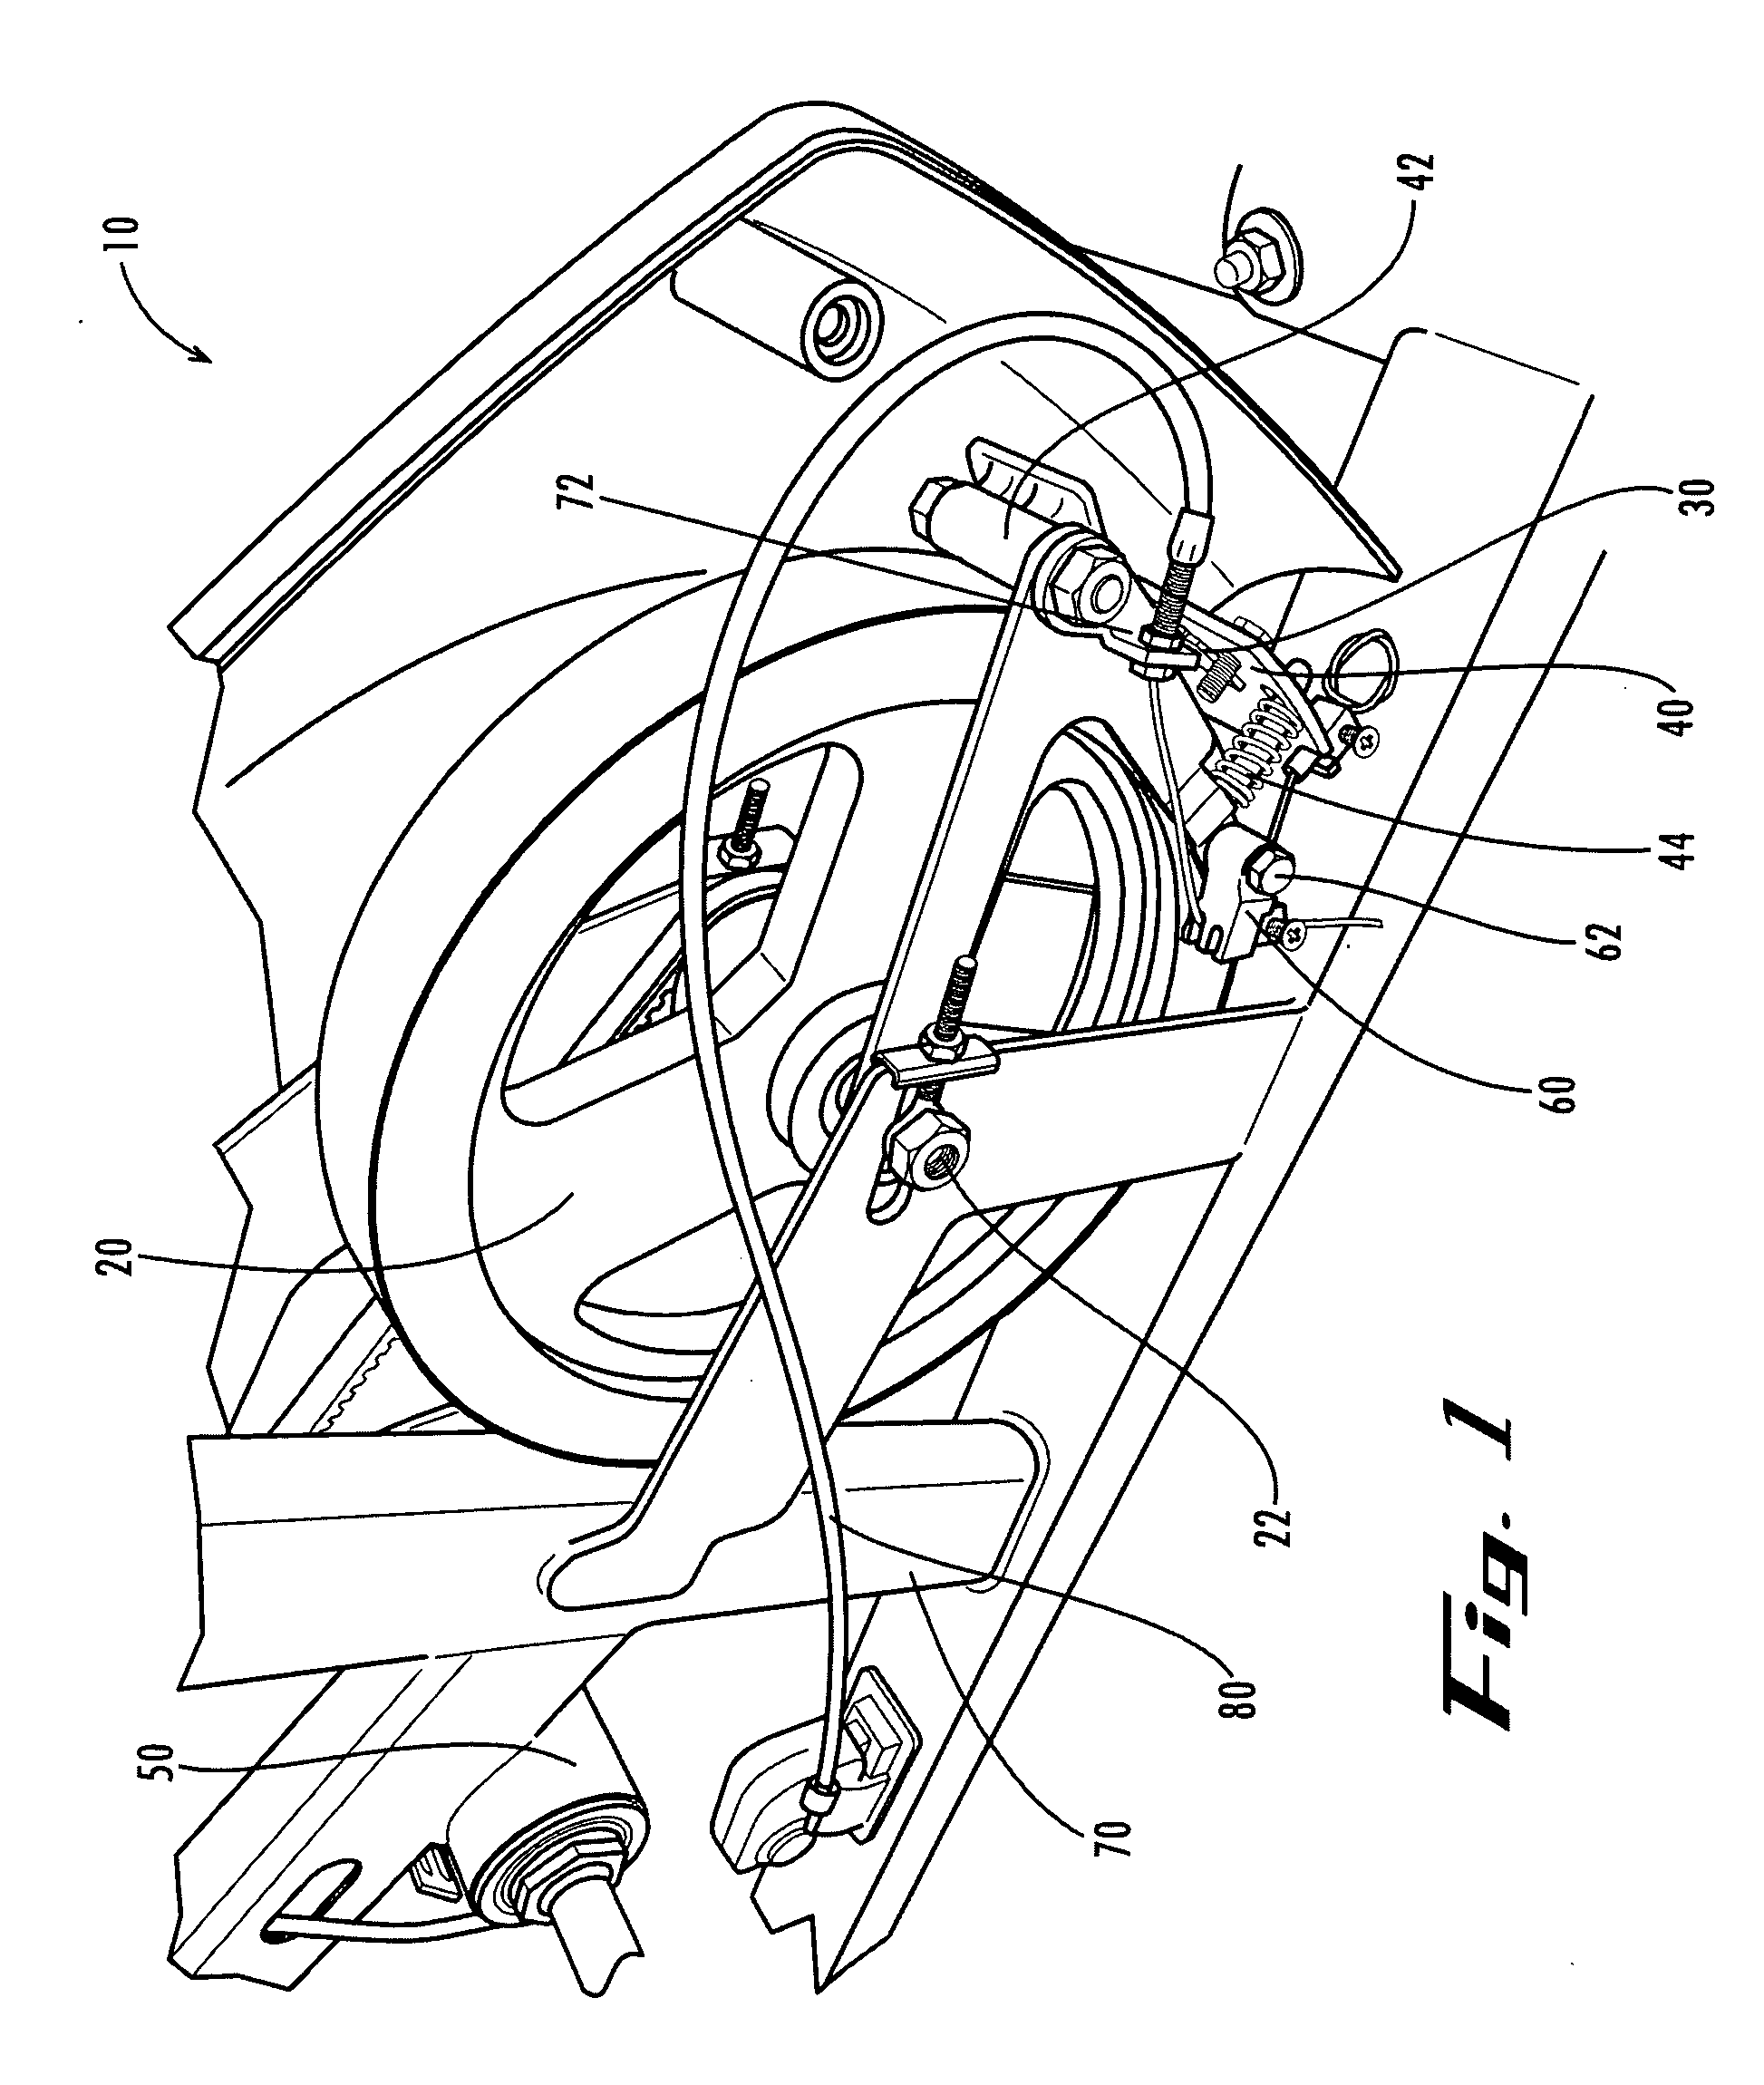 Linear-response resistance system for exercise equipment